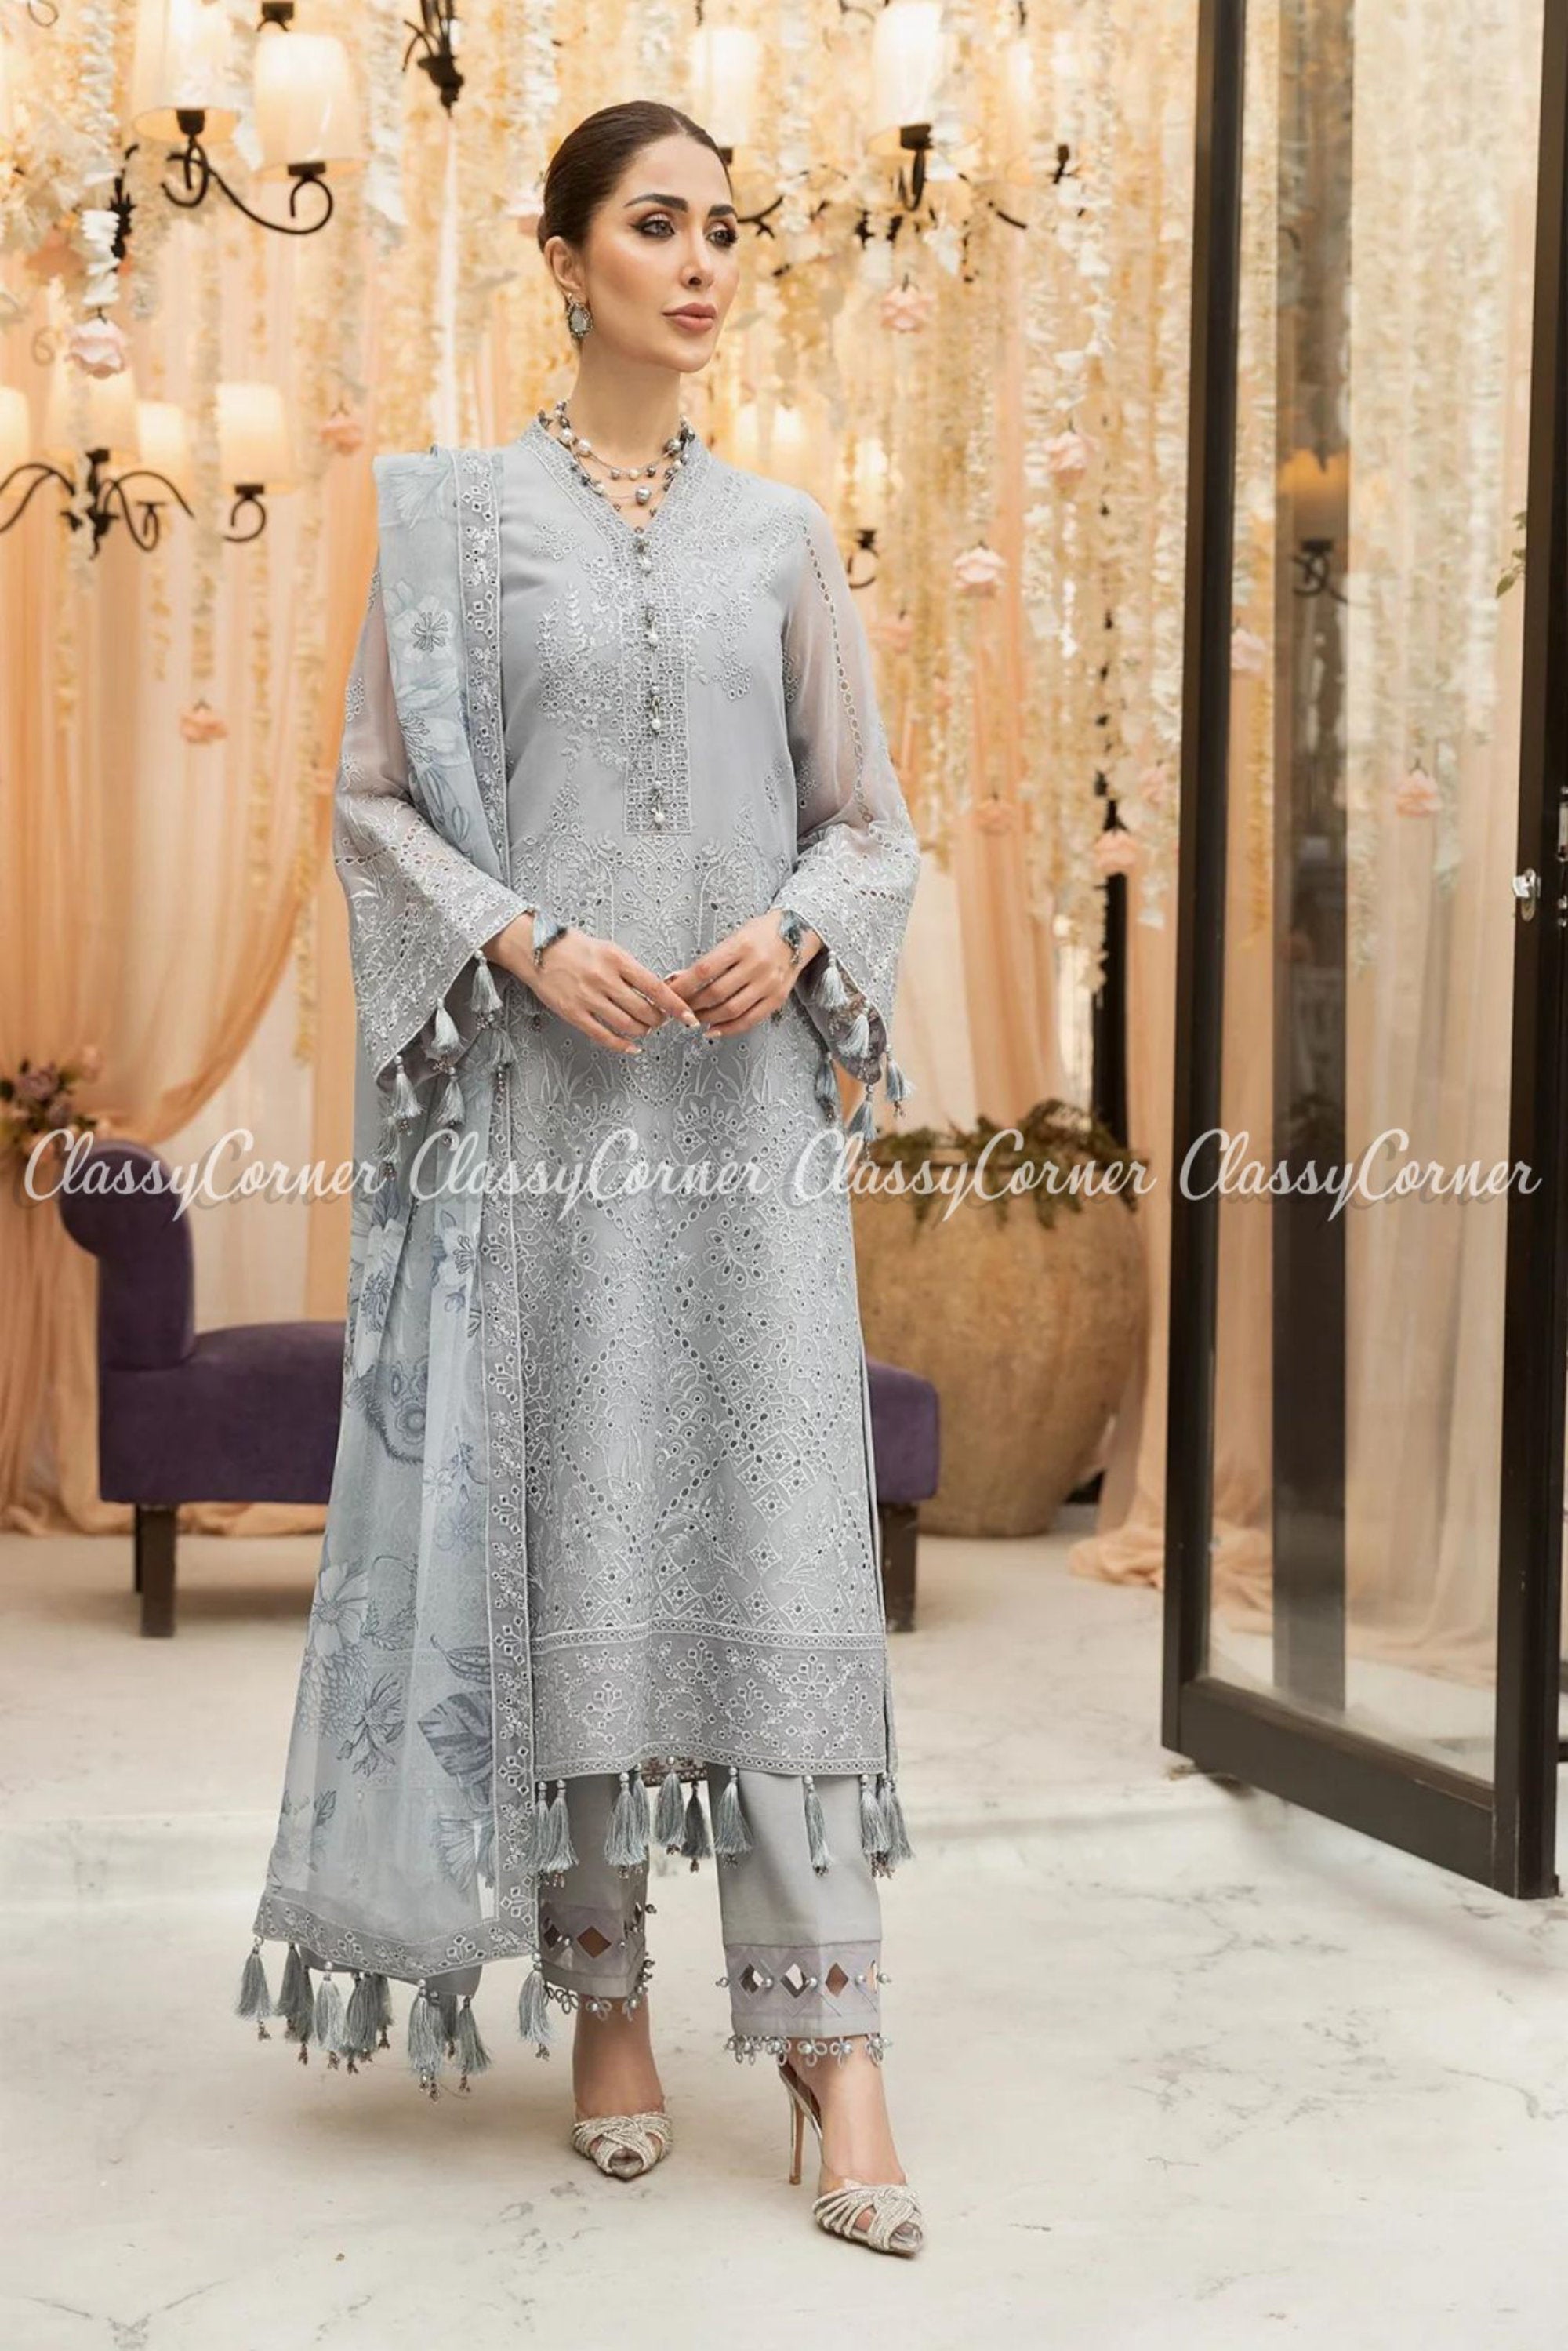 Designer and stylish Salwar Kameez Styles that are trendy in 2019.